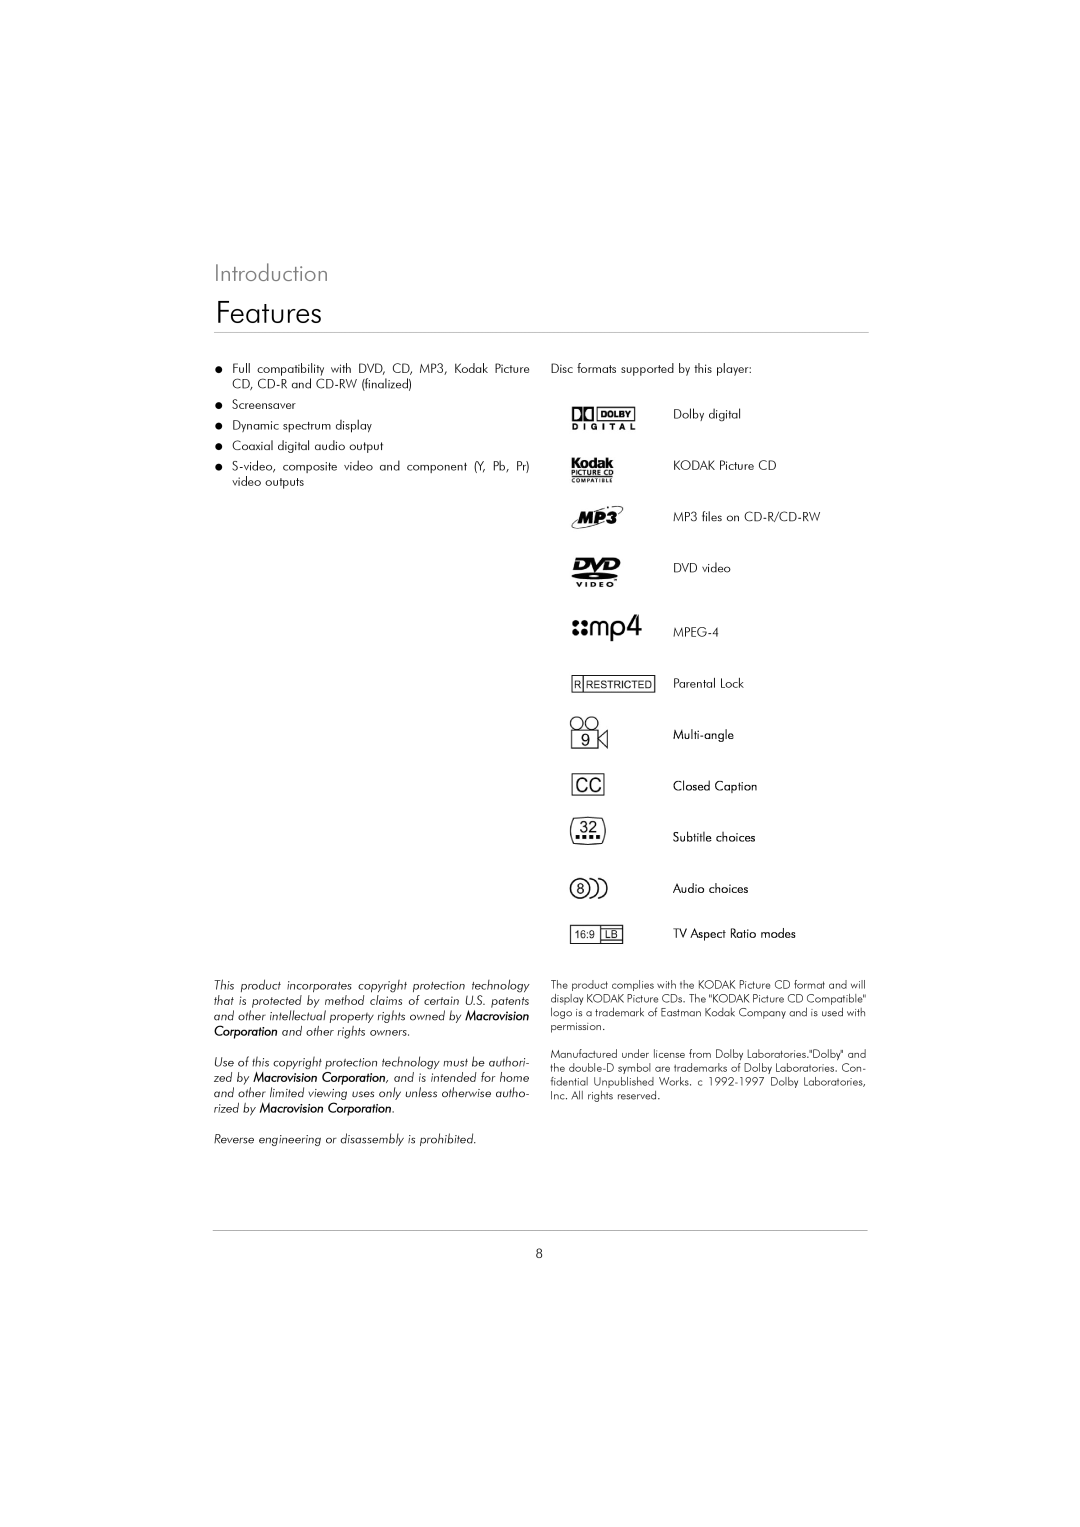 Kodak DVD 40 user manual Features, Introduction, Reverse engineering or disassembly is prohibited 